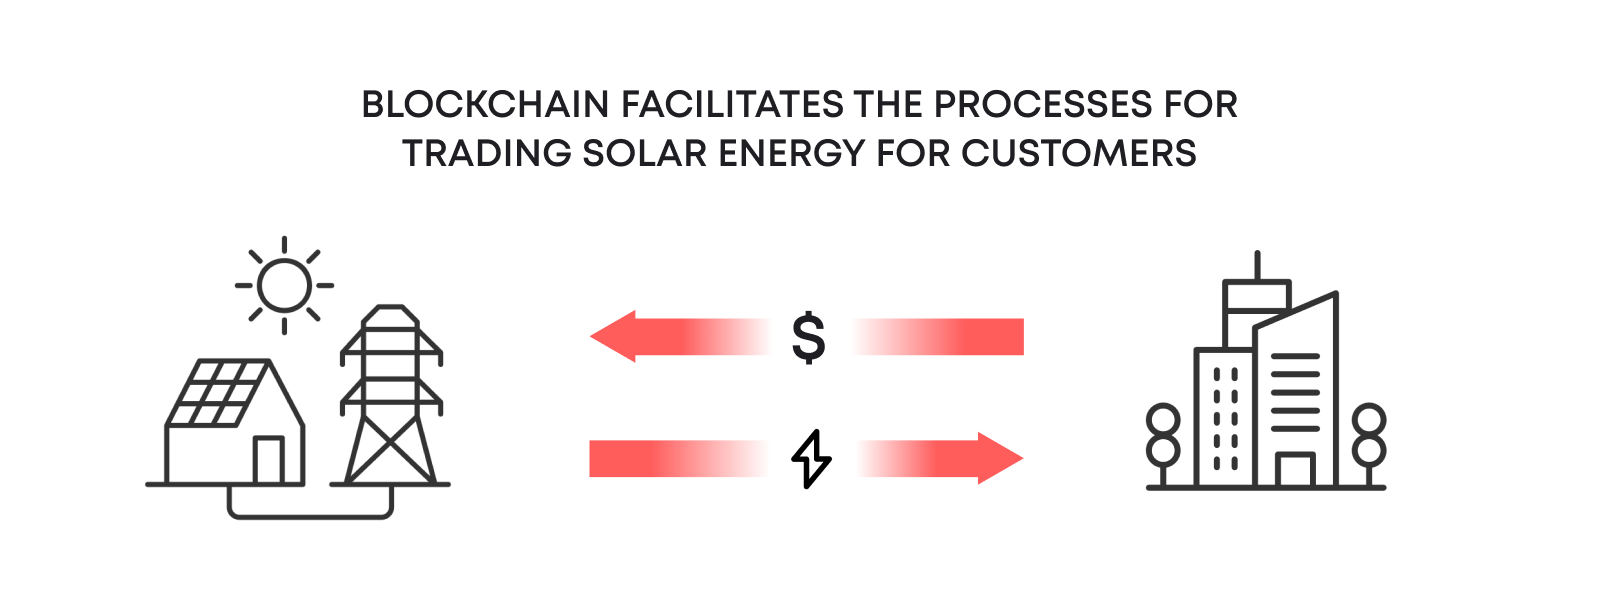 Blockchain-based technologies in energy trading are revolutionizing the way energy markets operate.